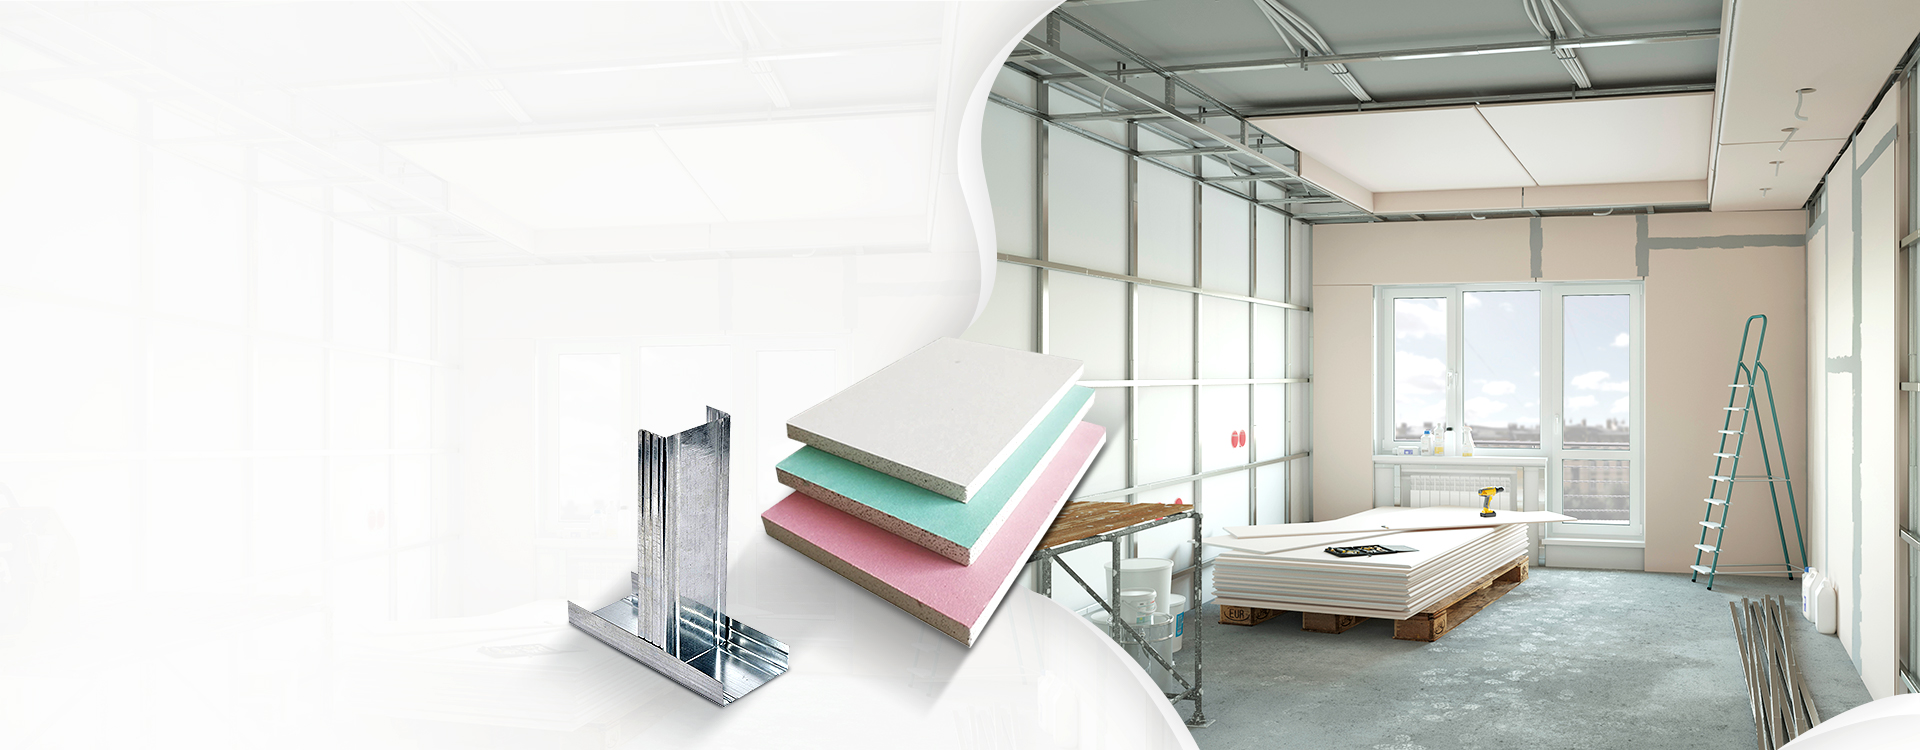 Variety of Wall Panel Products for Practical, Fashionable, and Unique Architectural Spaces: Gypsum Board, Fiber Cement Board, Wood Grain Cement Siding, Calcium Silicate Board, MGO Board, Drywall Metal Frame